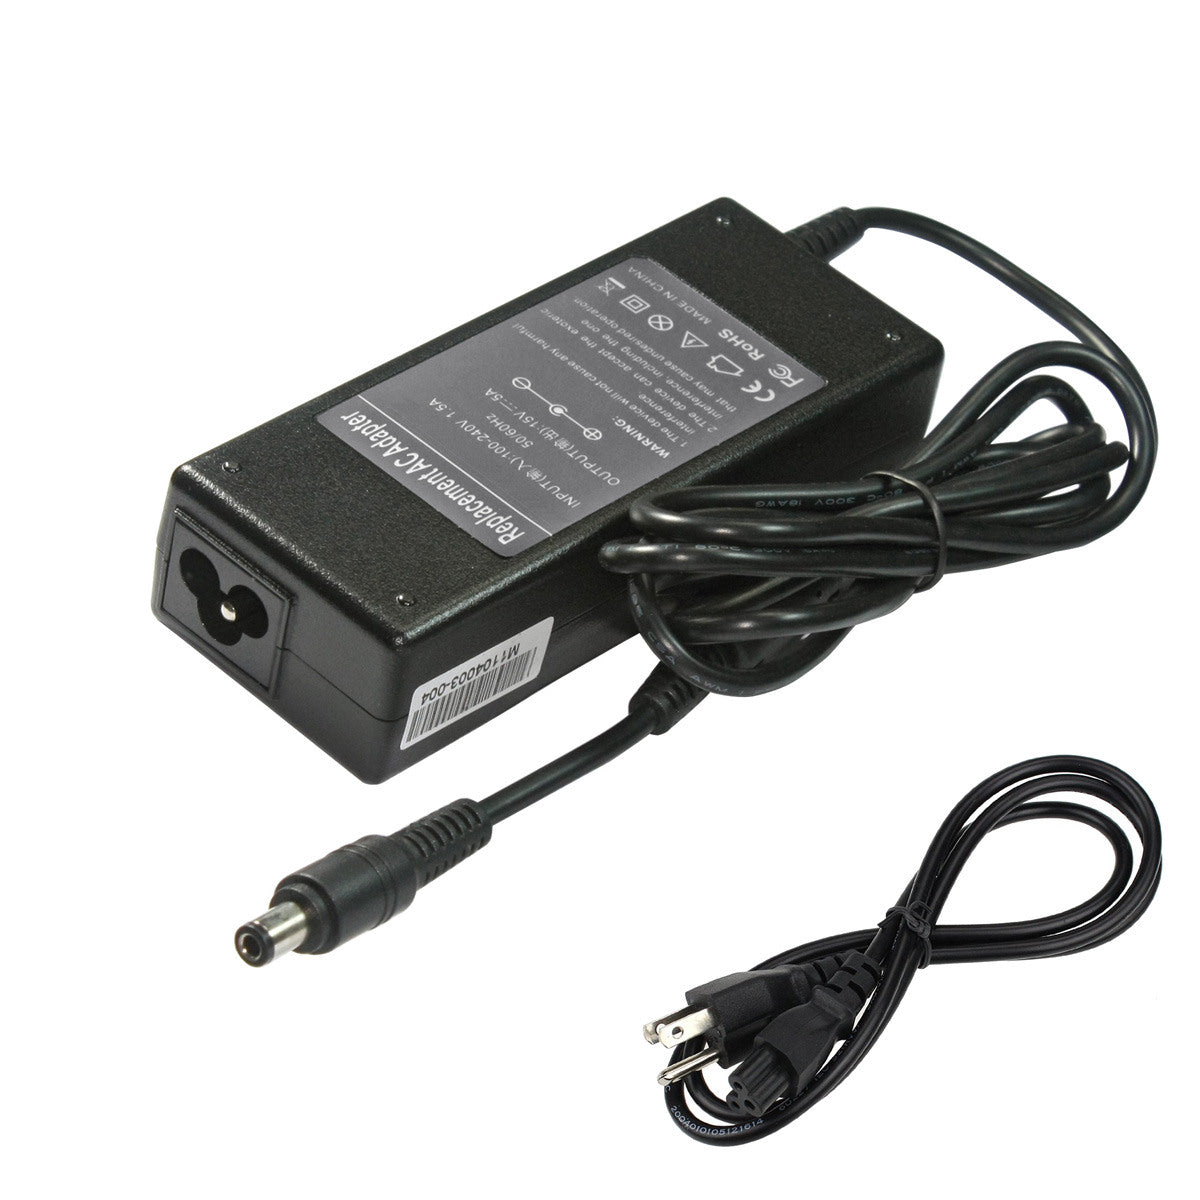 Compatible Replacement Toshiba Satellite M55-S3251 AC Adapter 75Watt 15V 5A.